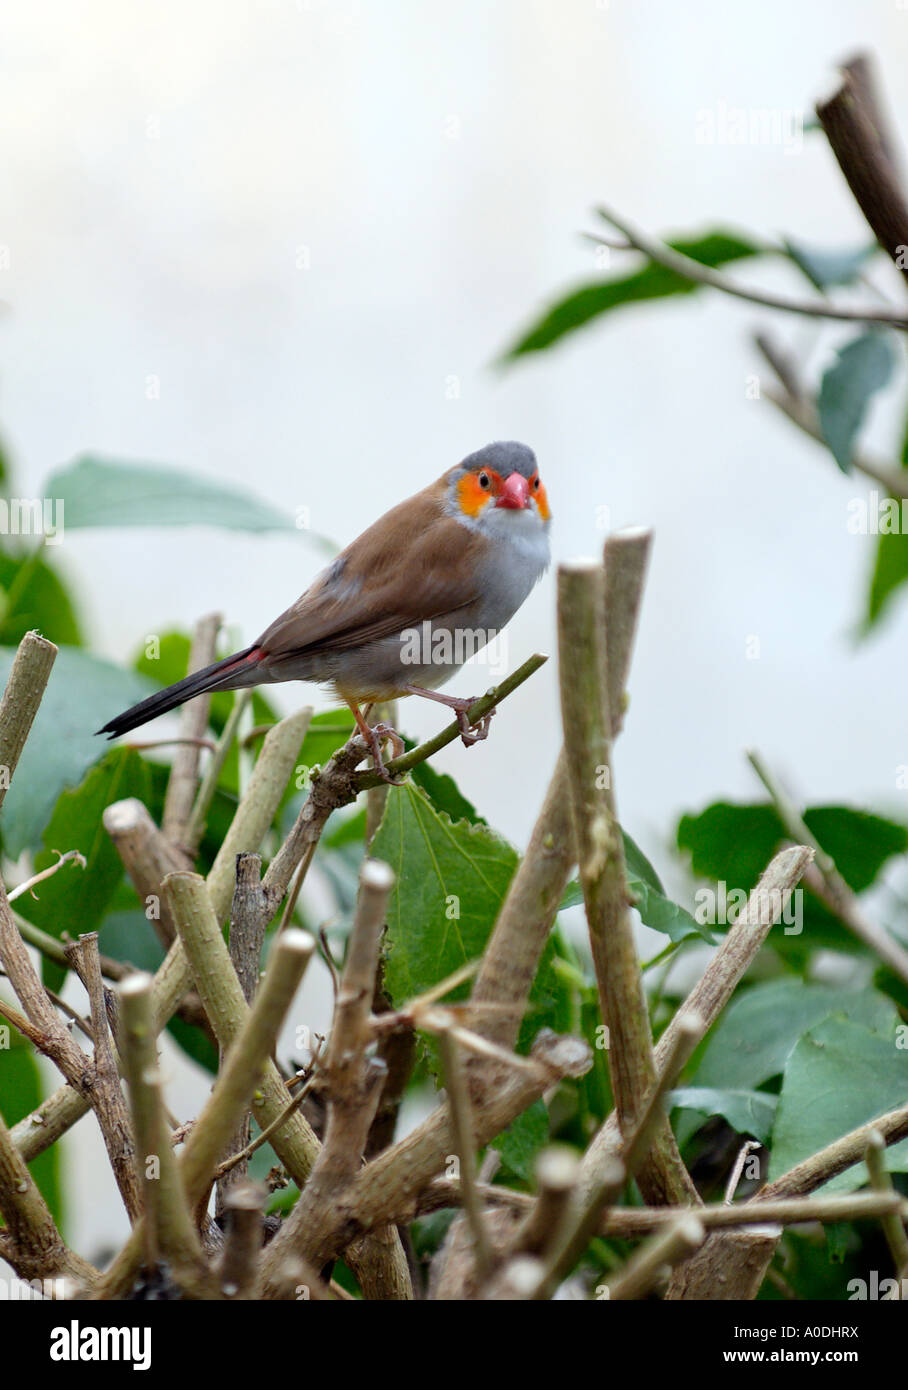 A Portrait Photograph of a Orange Cheeked Waxbill Finch Resting on a Tree Branch Stock Photo